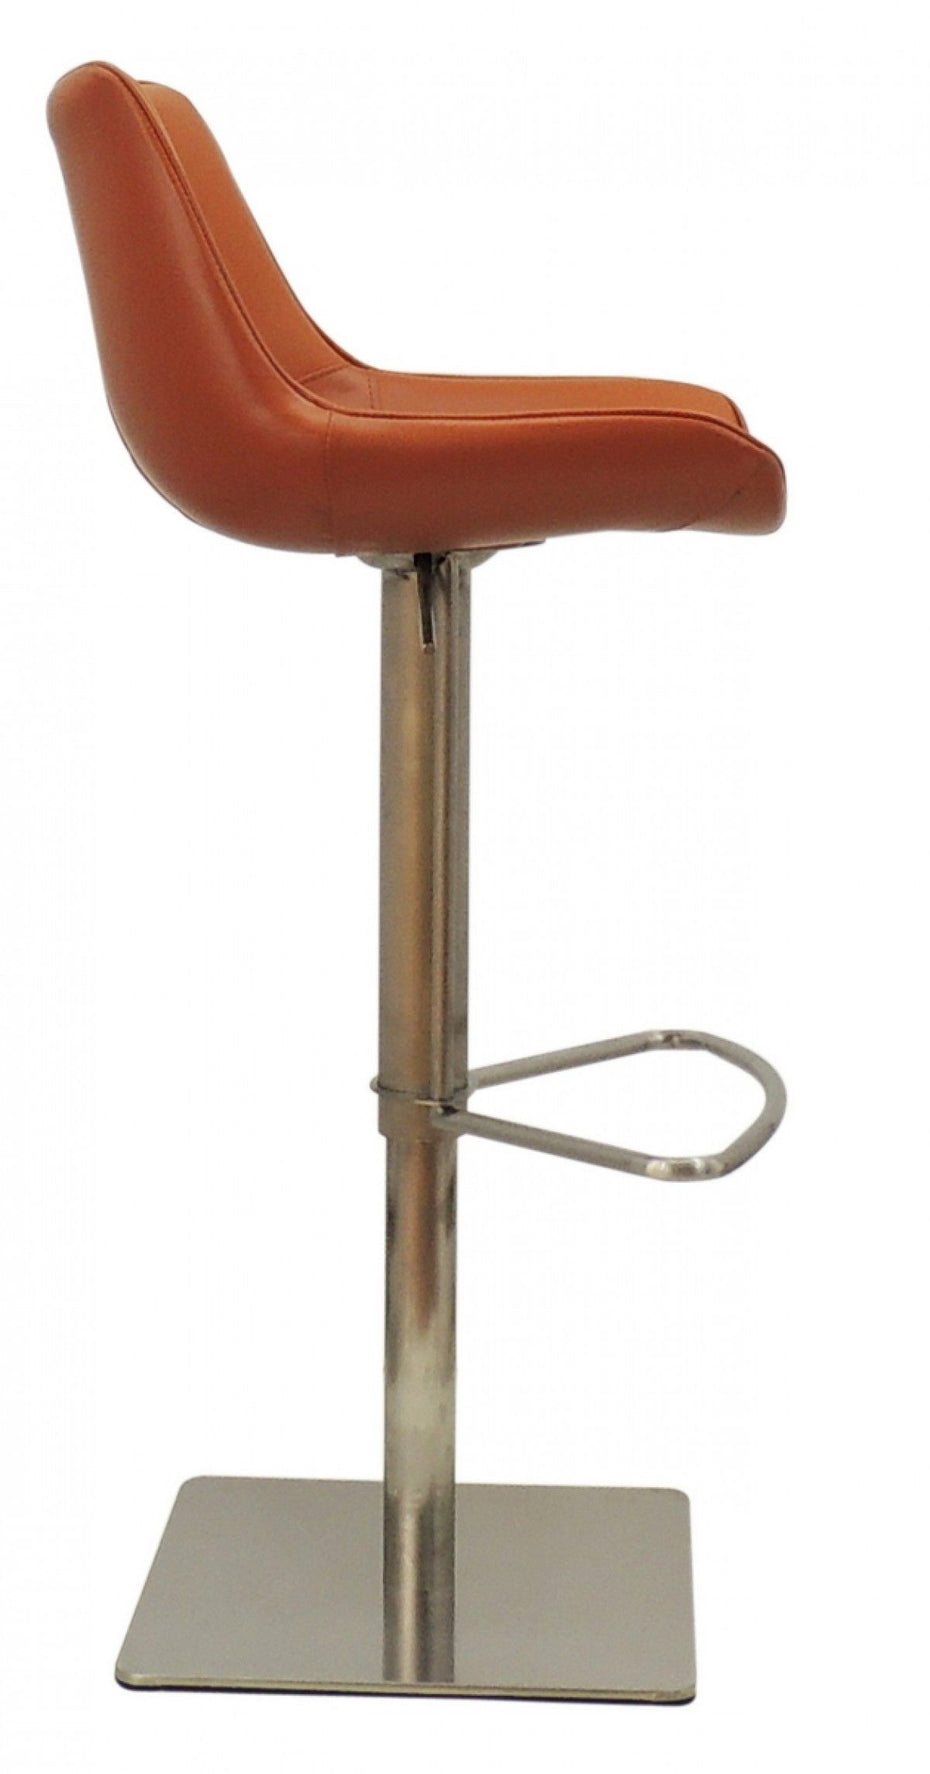 Faux Leather And Stainless Steel Swivel Adjustable Height Bar Chair With Footrest 42" - Cognac